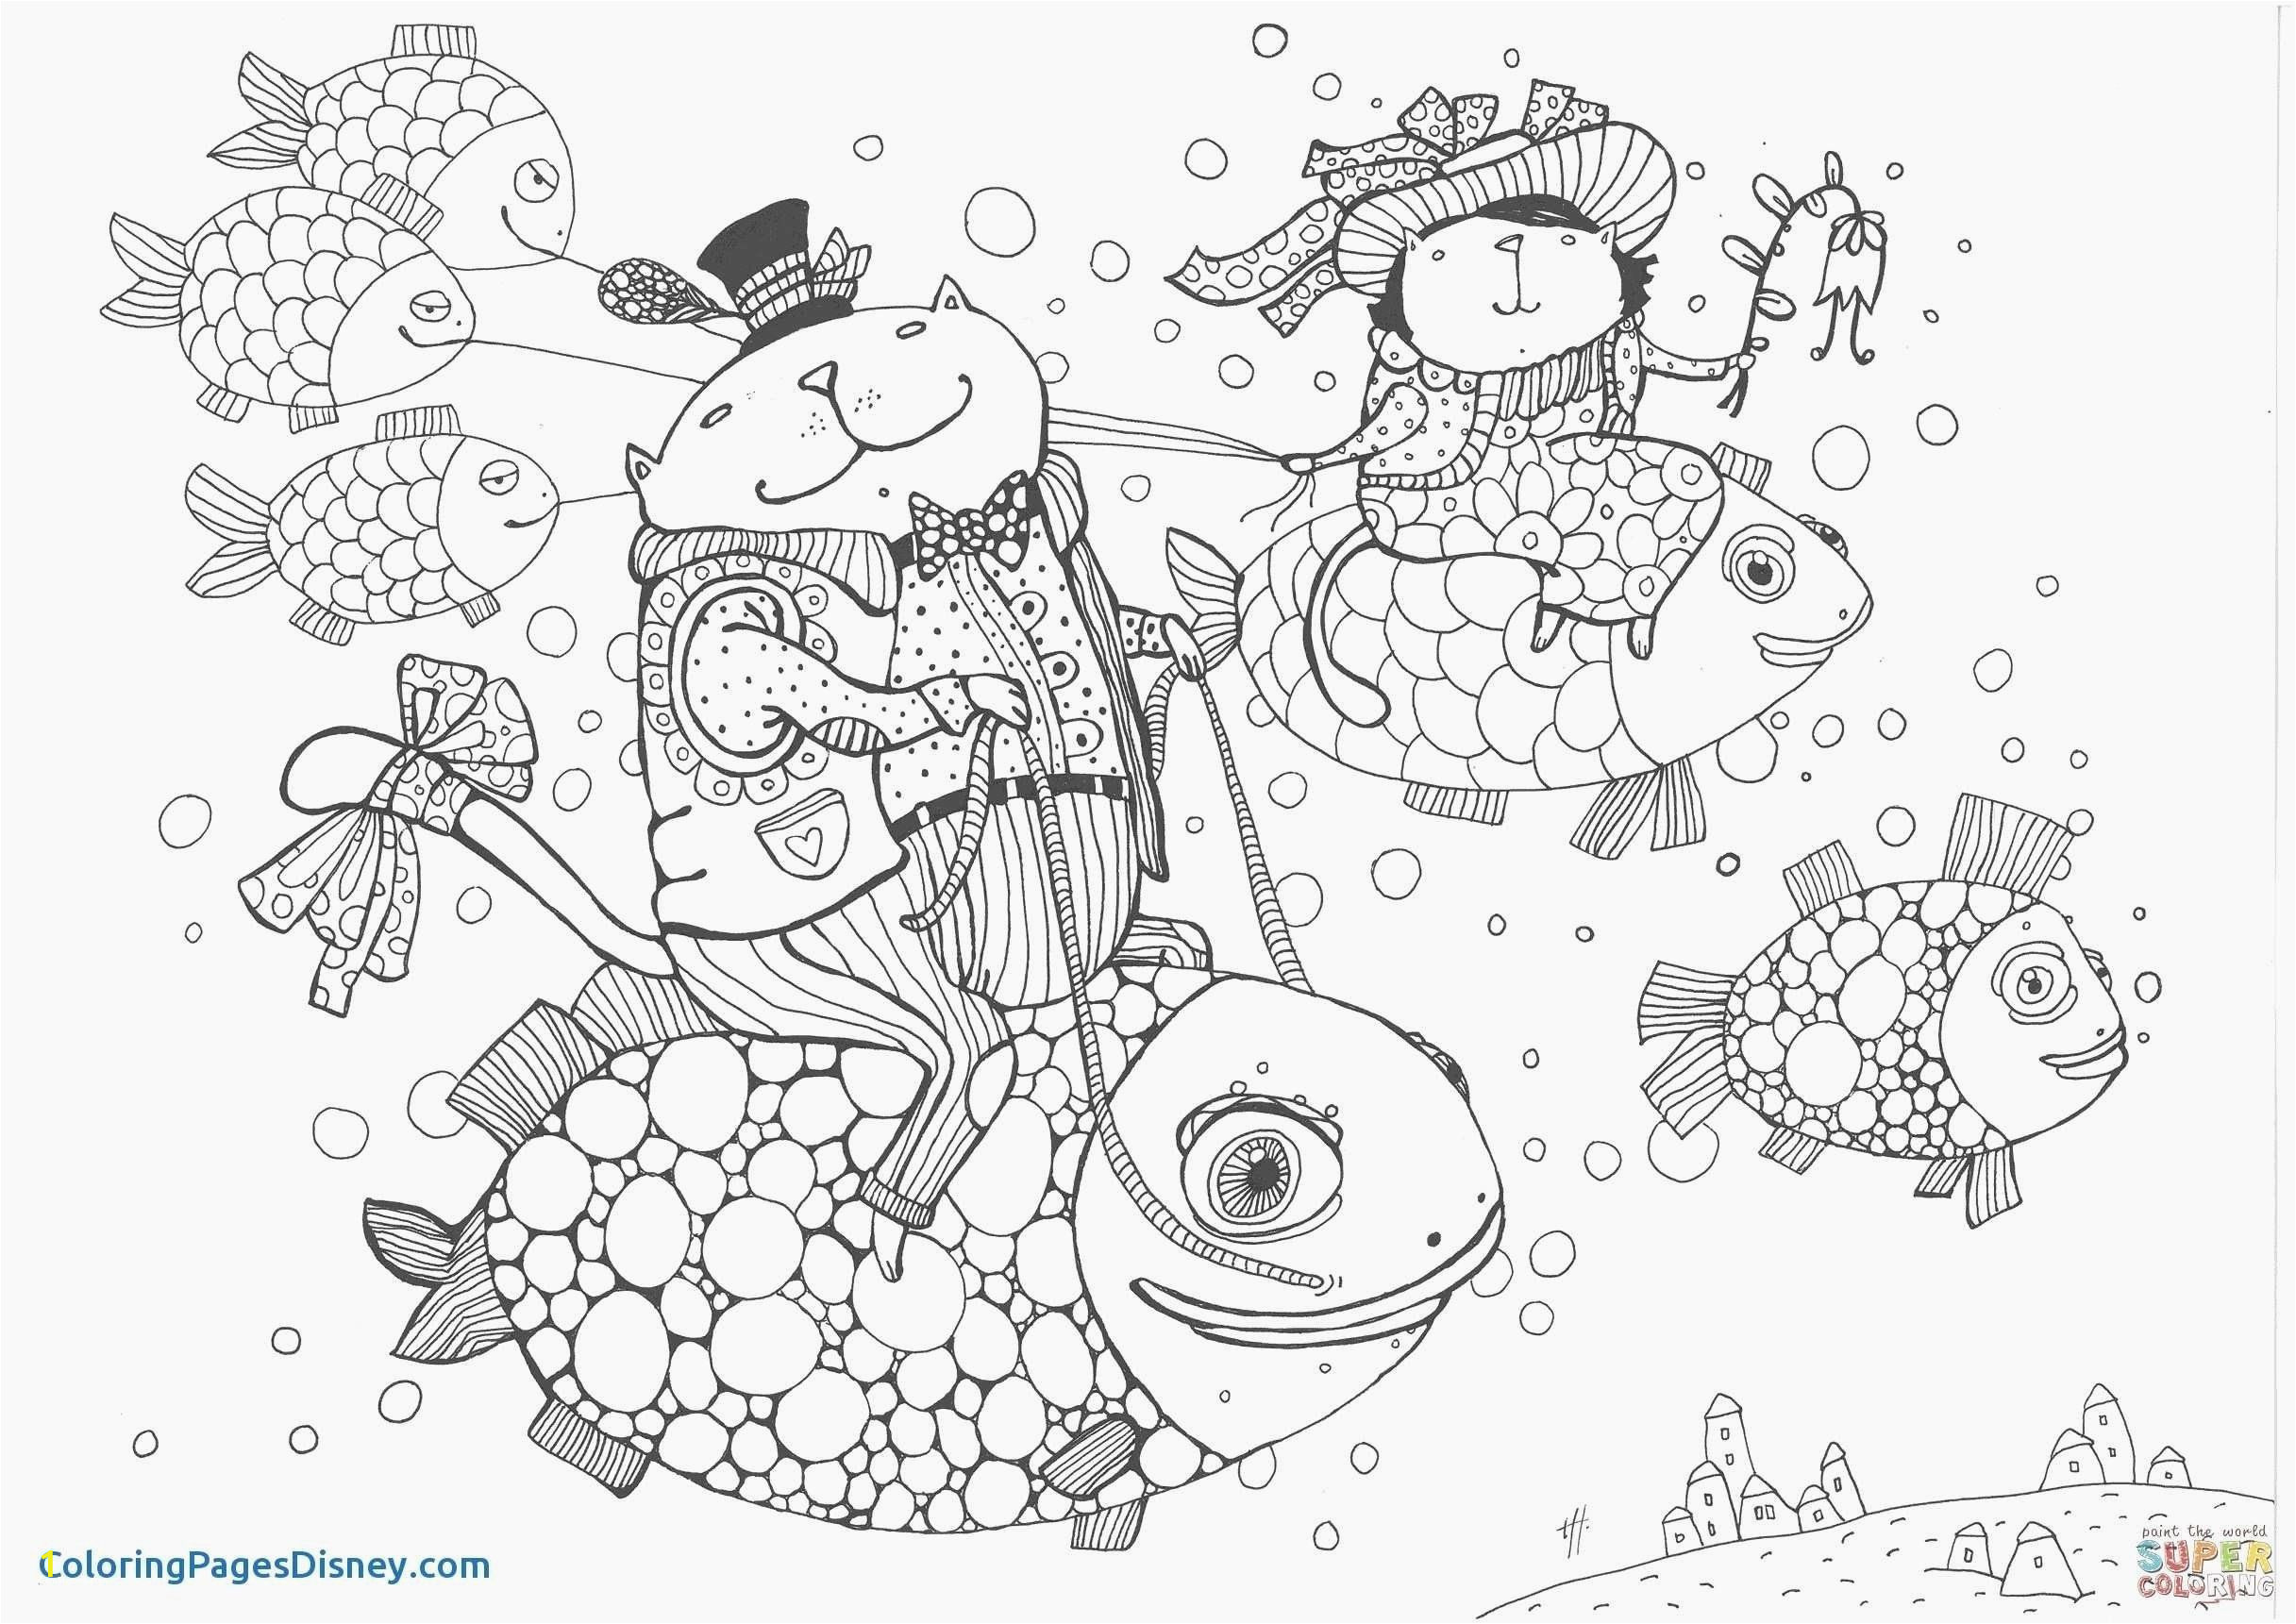 Coloring Pages You Can Color Online Disney Coloring Pages Free Disney Coloring Pages for Adults Free